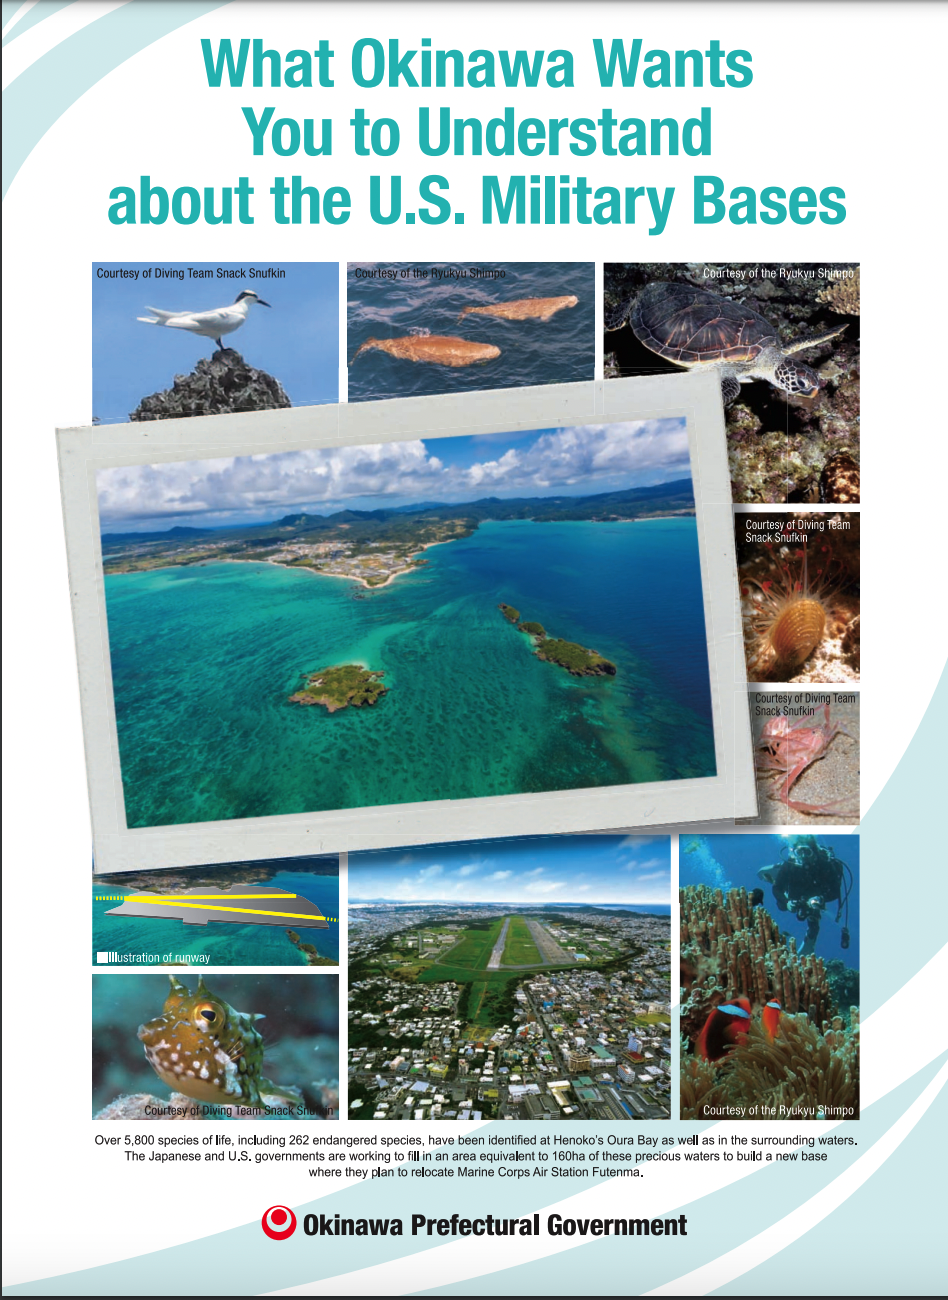 What Okinawa Wants You To Know about the U.S. military bases